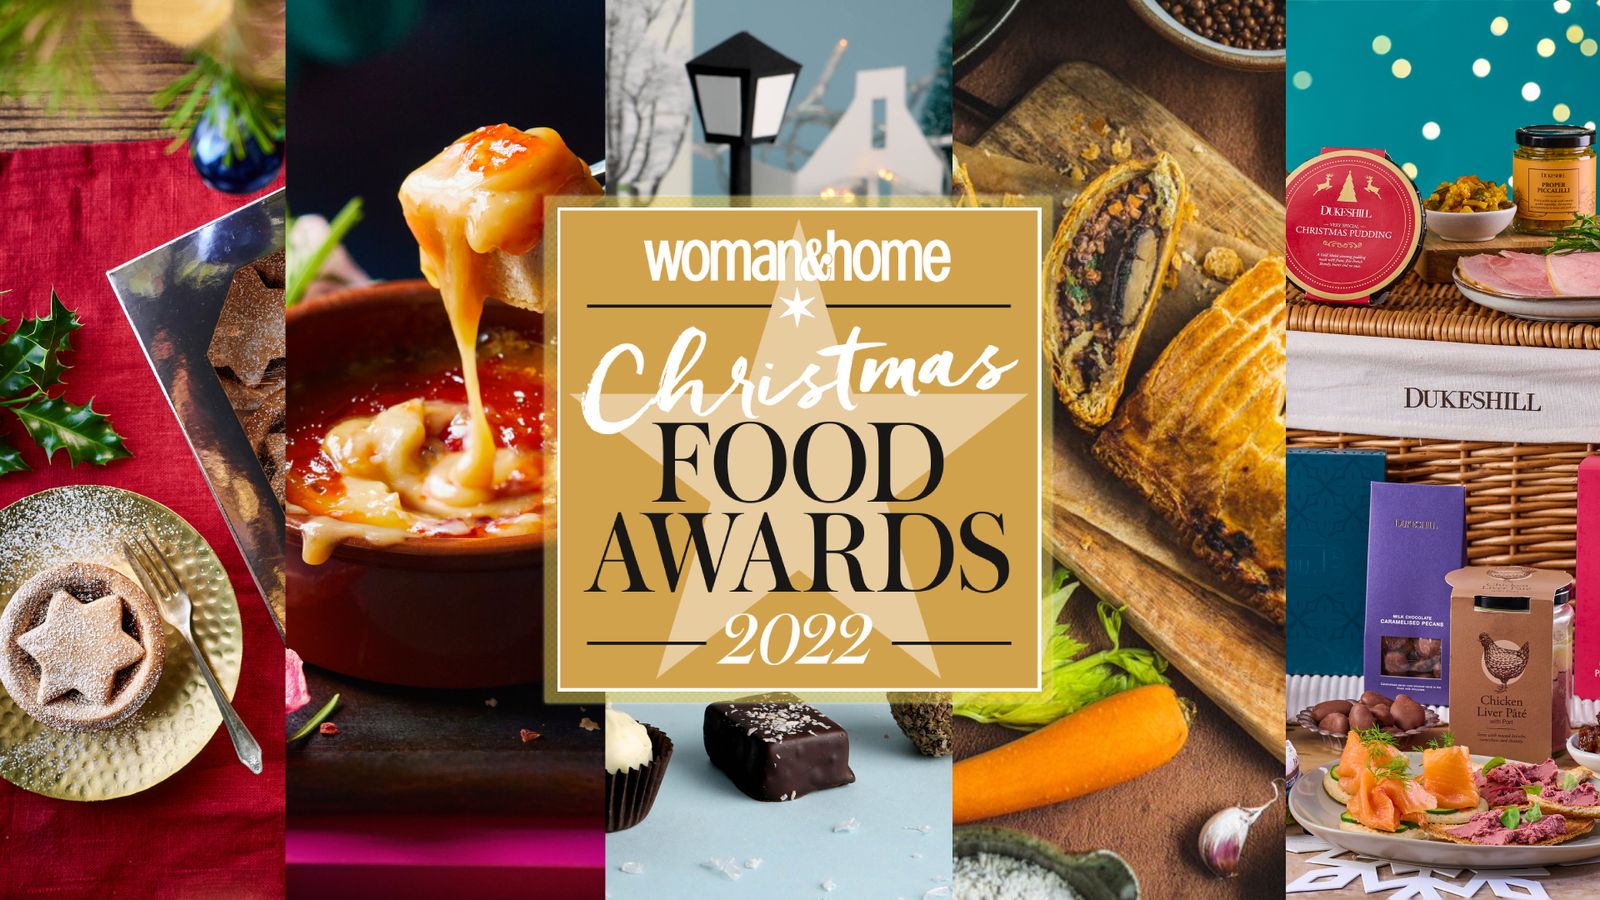 The woman&home Festive Food Awards Special Recognition awards winners